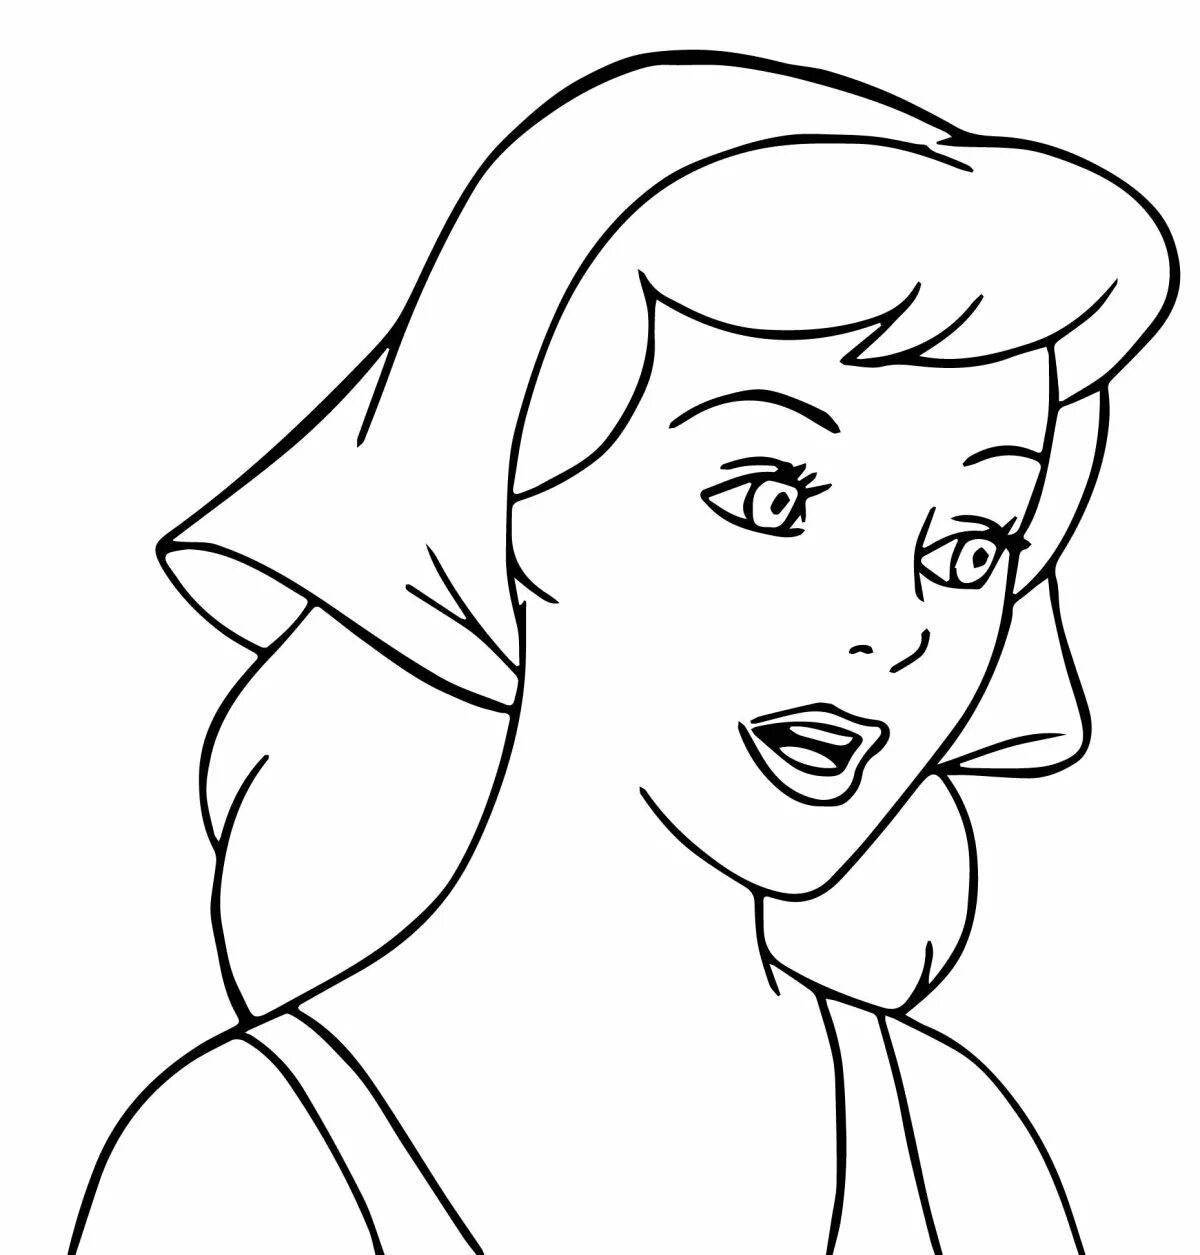 Amazing woman coloring pages for kids